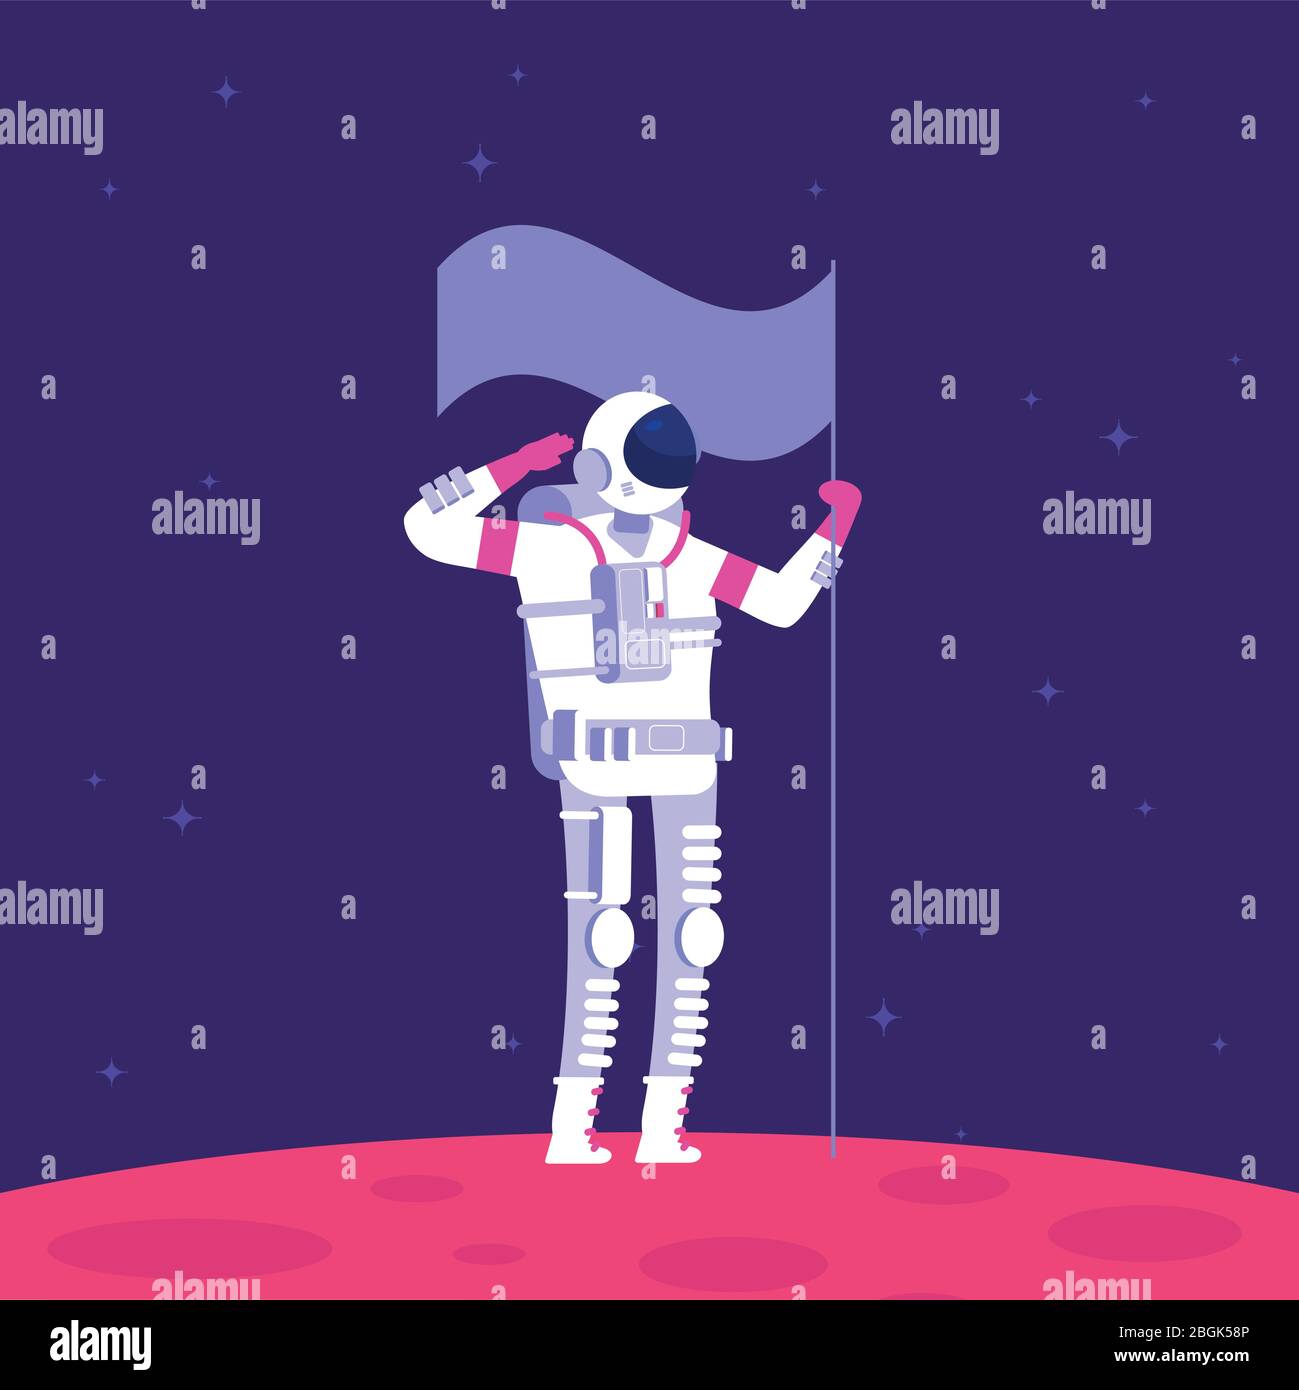 Mars colonization. Astronaut holging flag on red planet in outer space. Mars project astronautics vector concept. Illustration of astronaut spaceman exploration mission Stock Vector